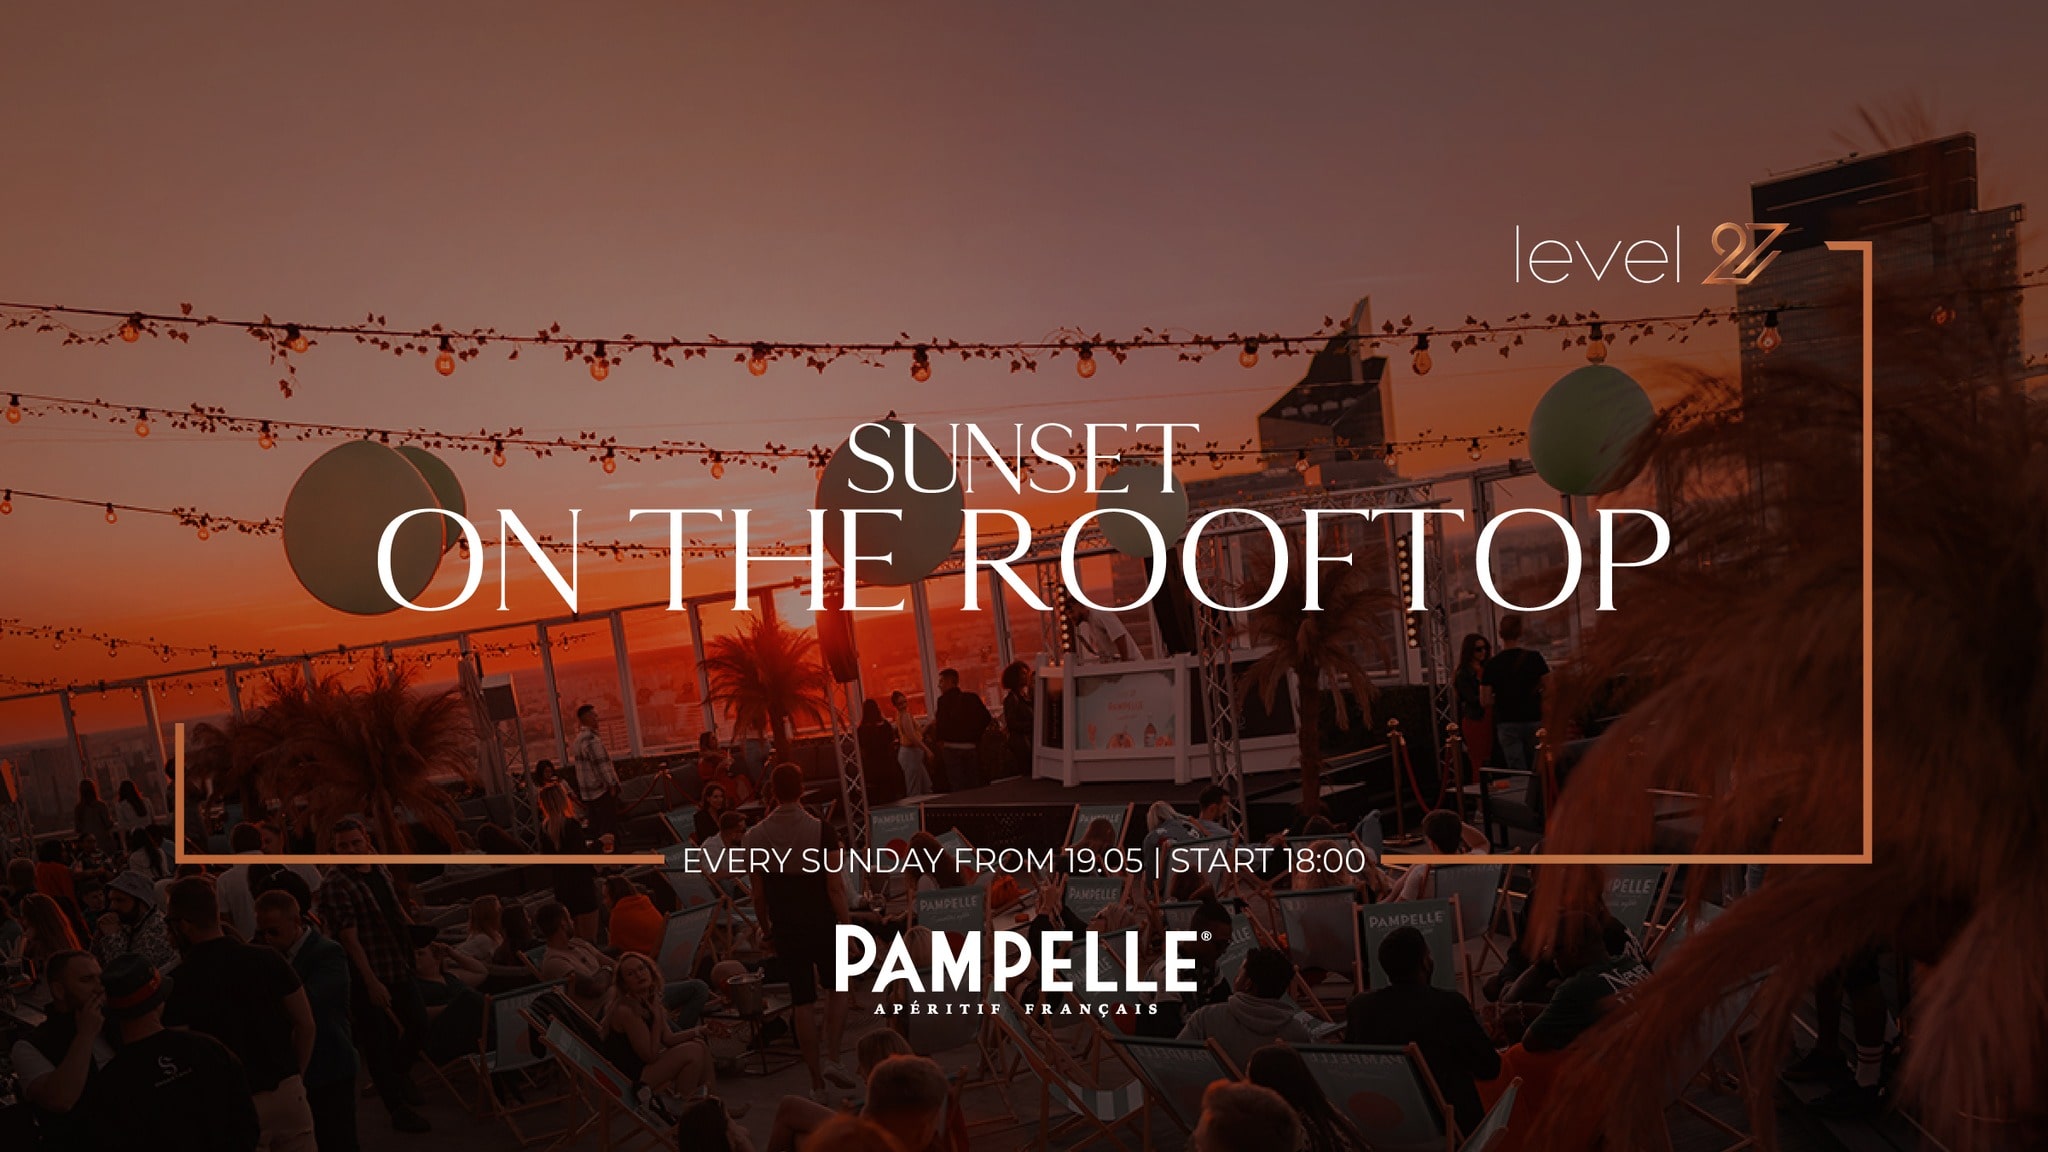 SUNSET ON THE ROOFTOP | SUNDAY CHILLOUT & DAY PARTY